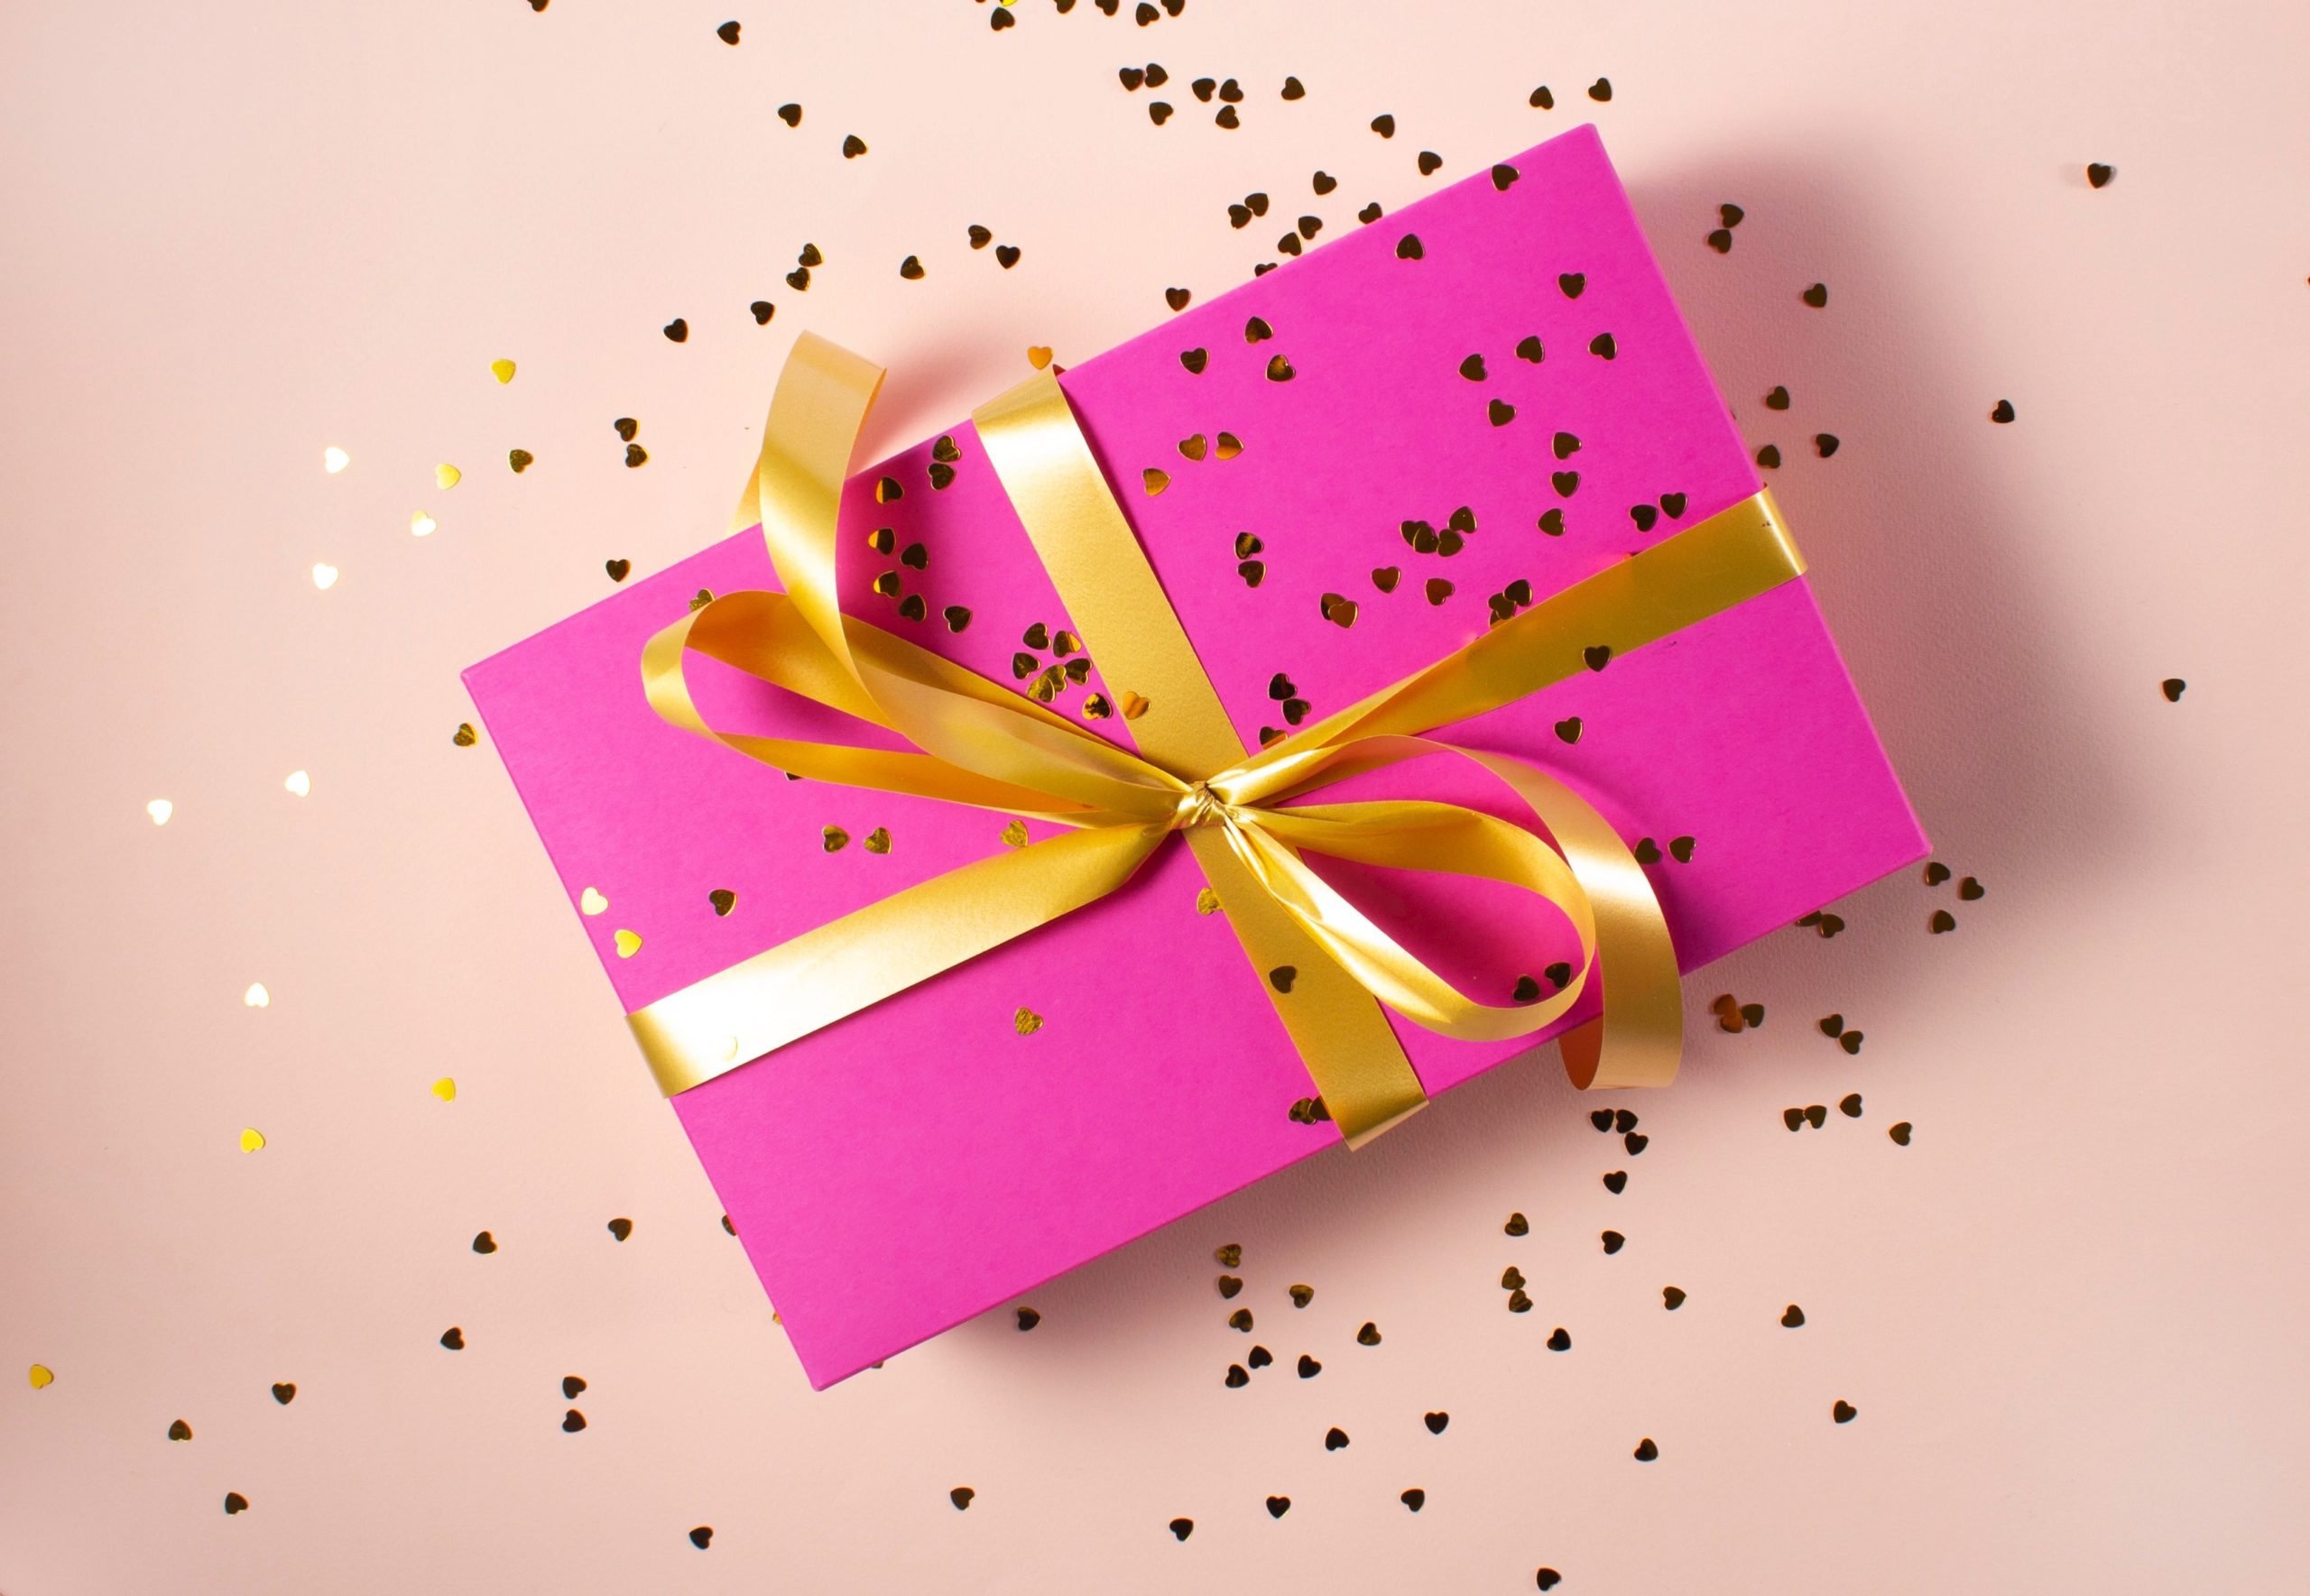 <img src="pink.jpg" alt="pink and gold giftwrapped present"/> 